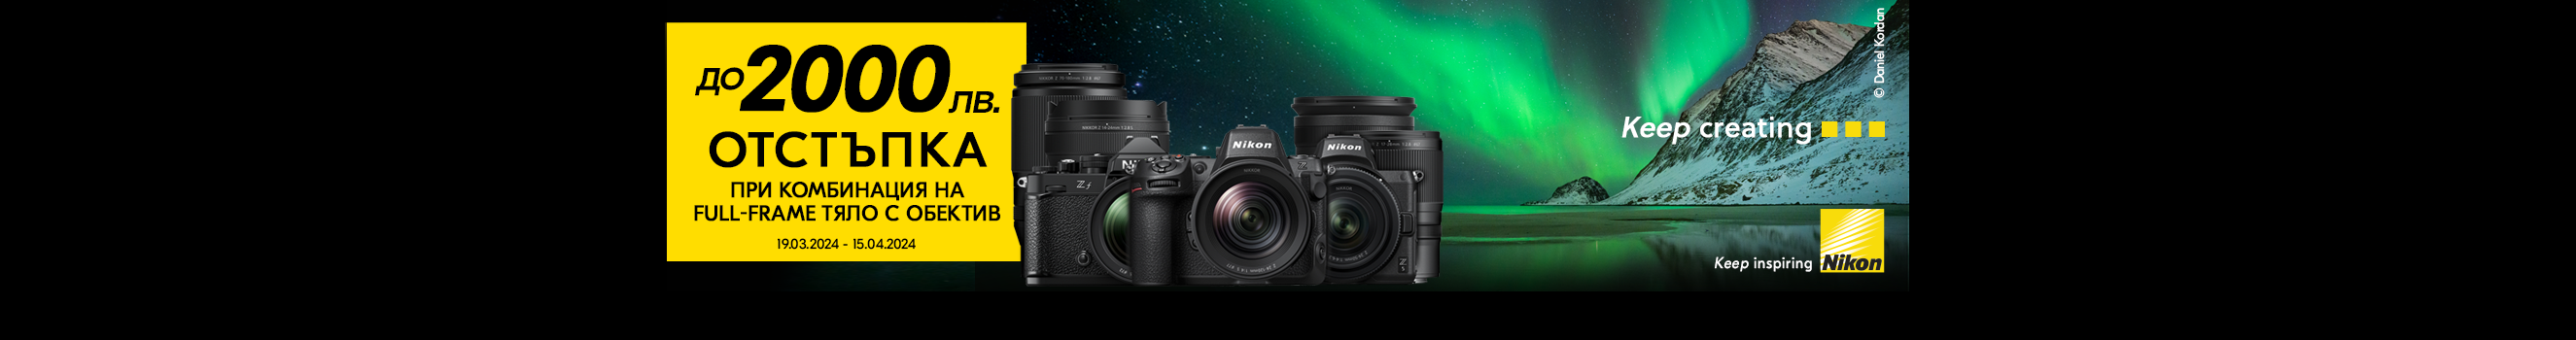  Get selected full-frame Nikon Z cameras alone or bundled with selected lenses with up to BGN 2,000 off the price of the lens until 15.04